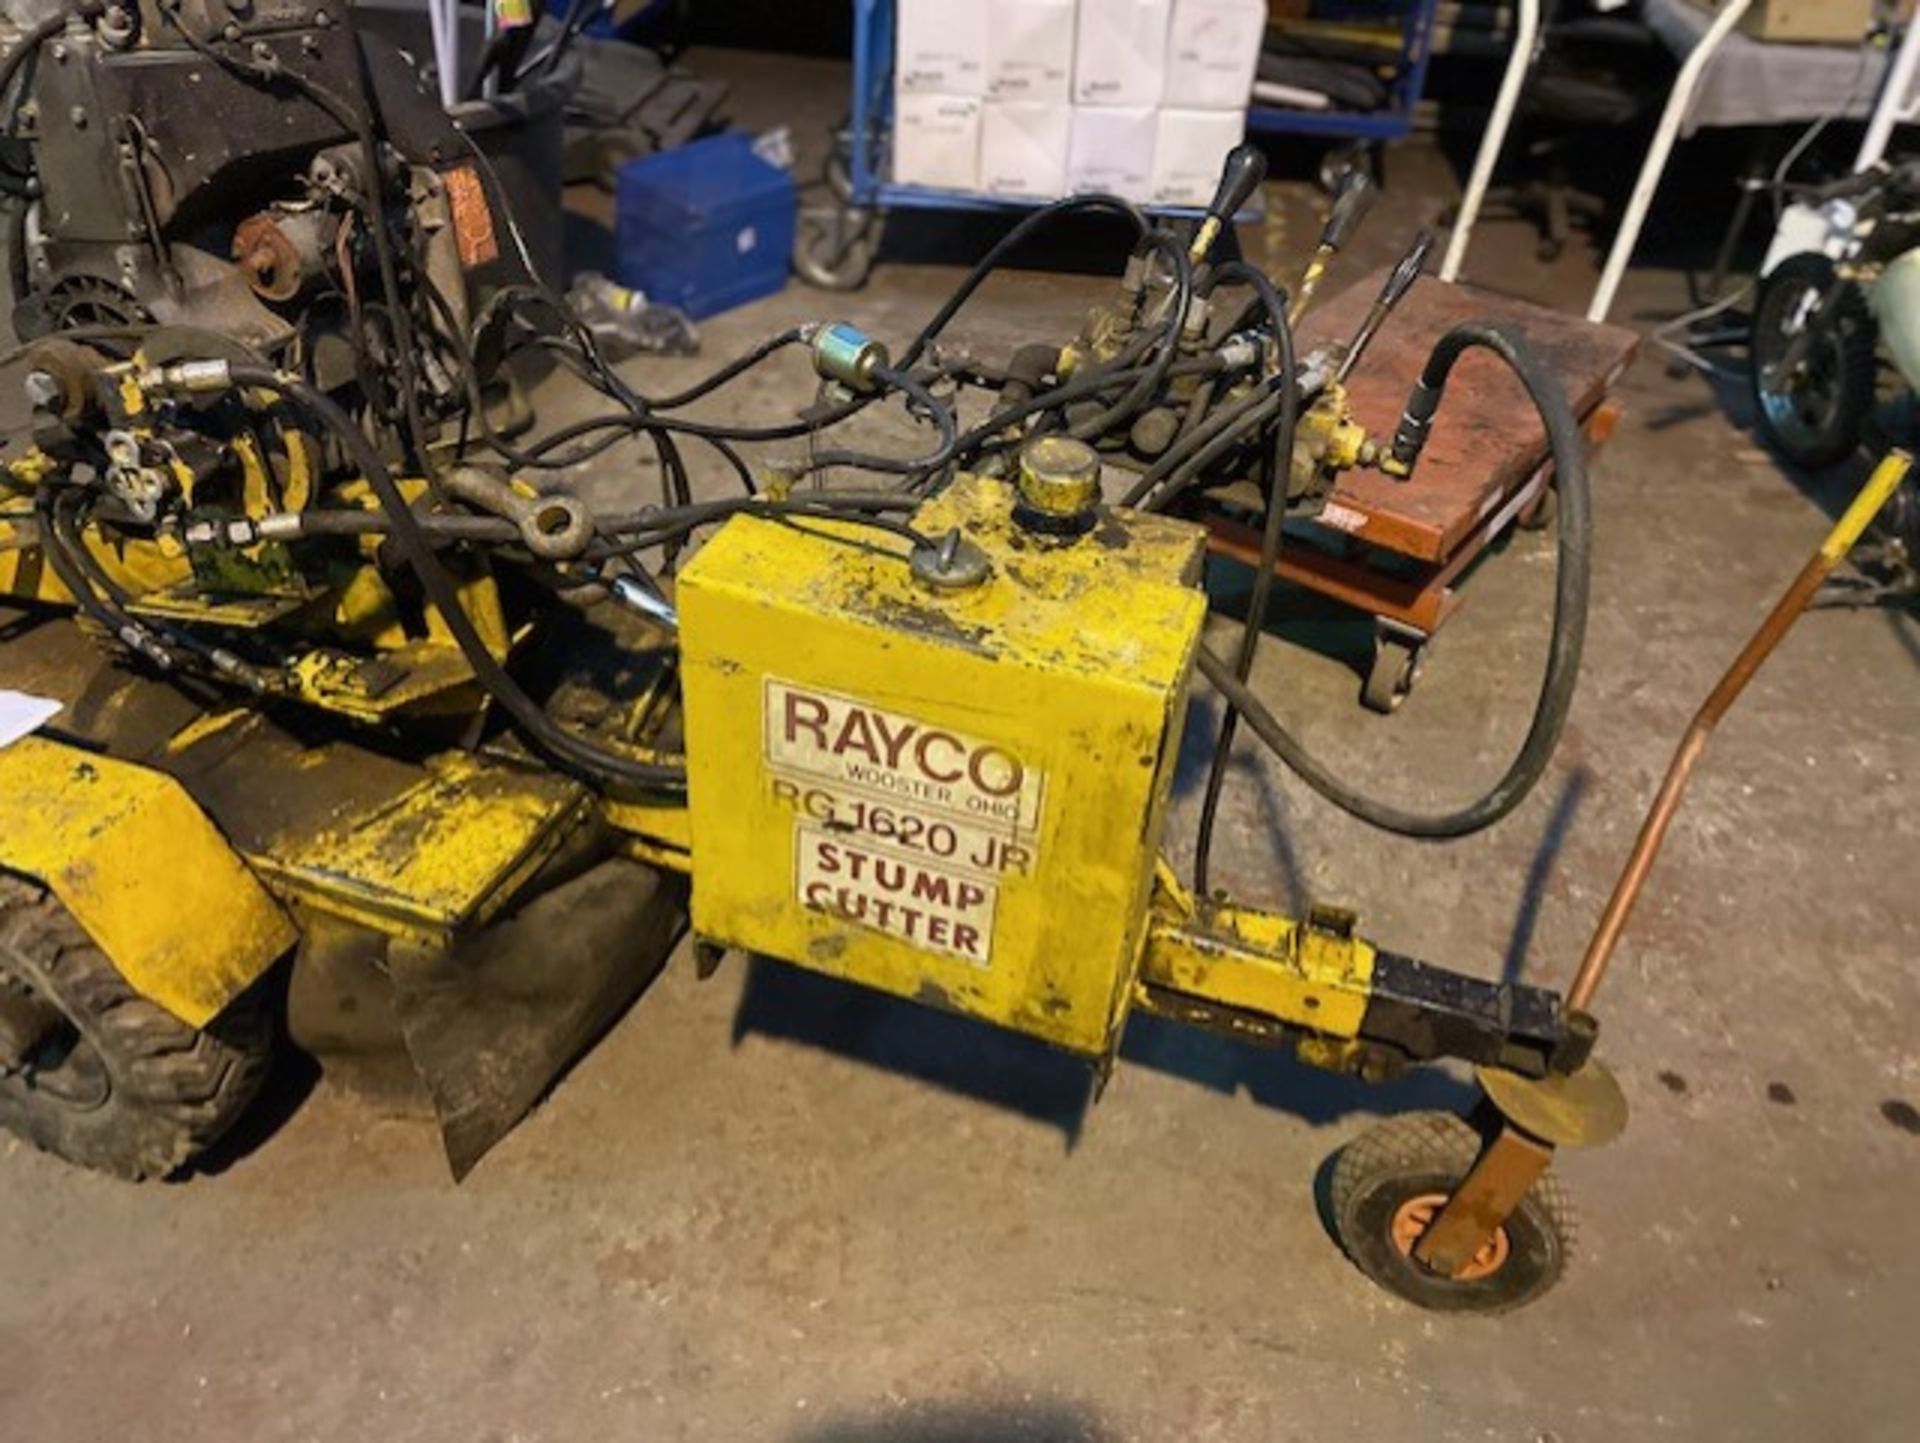 Stump grinder rayco 1620 with a diesel engine al together from belts to frame rare machine locking - Image 6 of 7